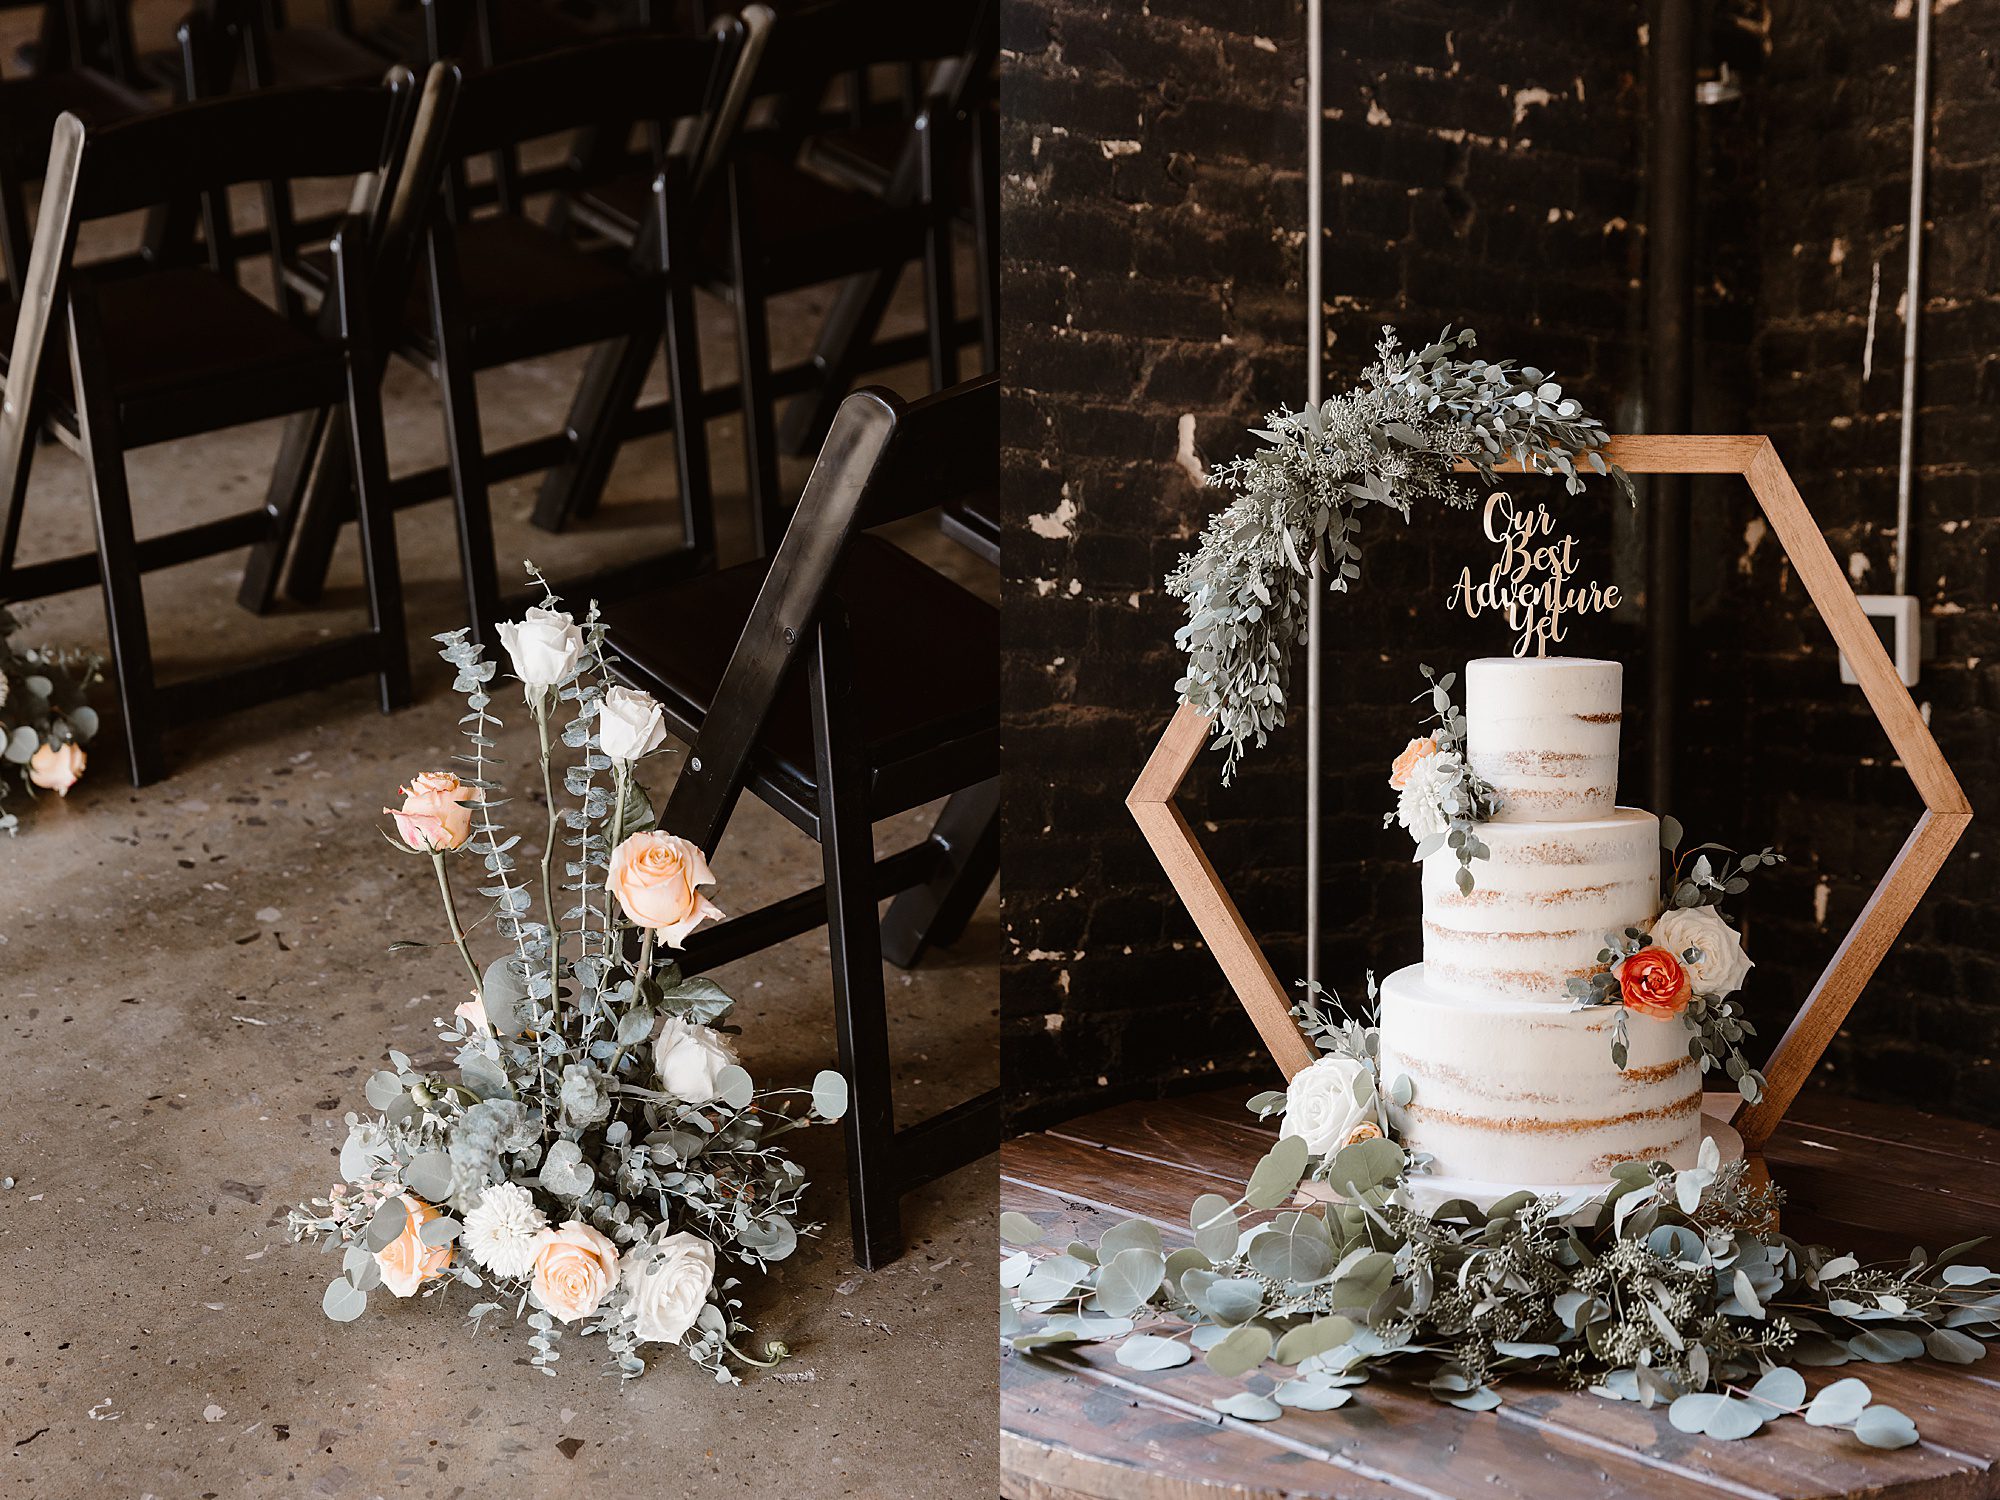 wedding cake and wedding ceremony decorations at urban warehouse with black walls